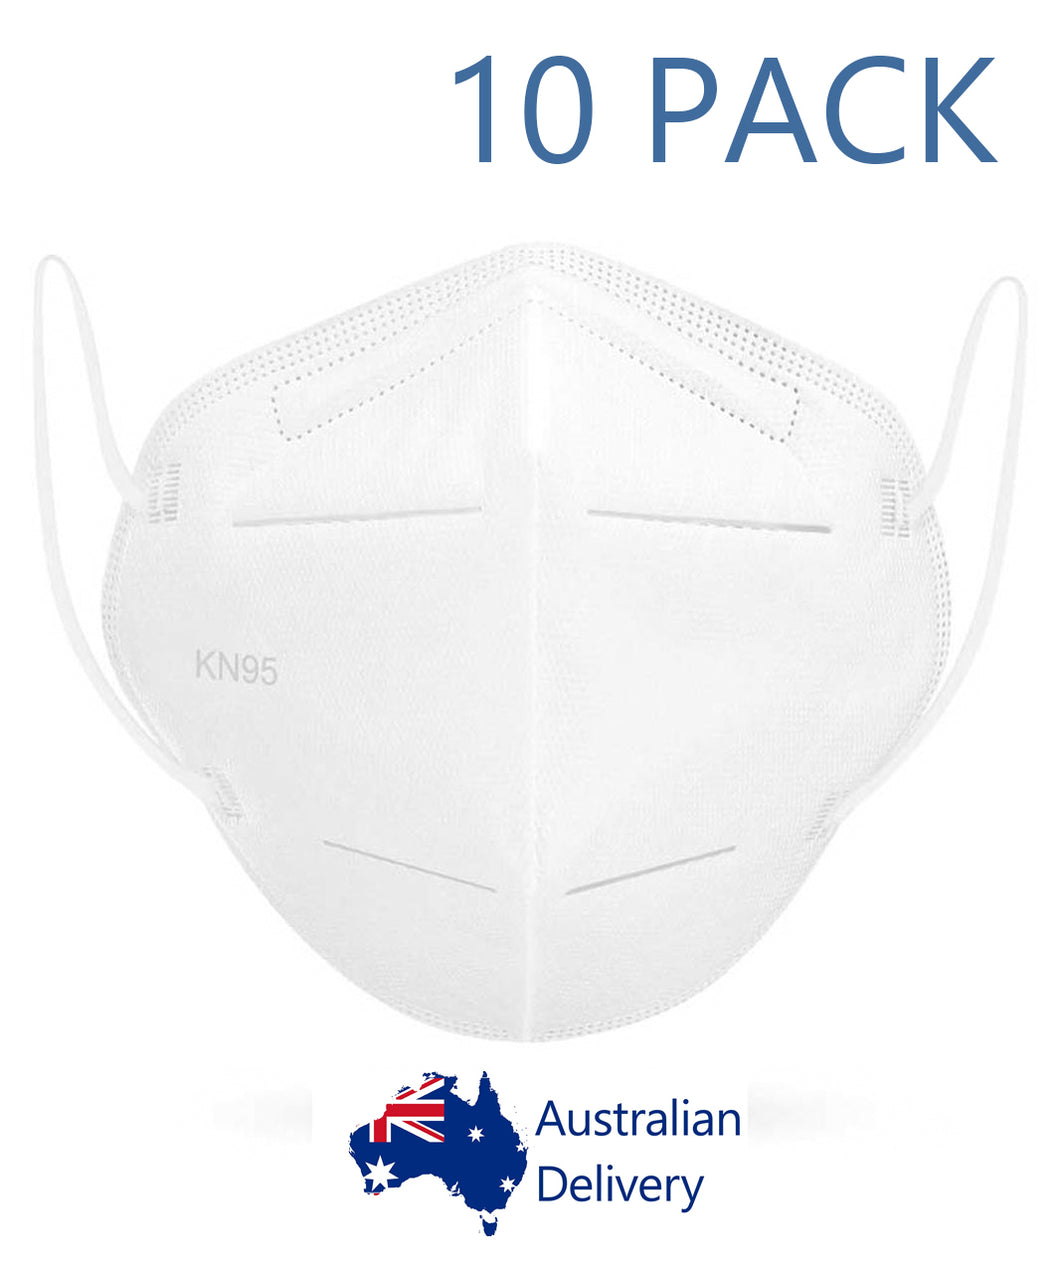 KN95 Masks (10 pack)                IN STOCK - BUY NOW